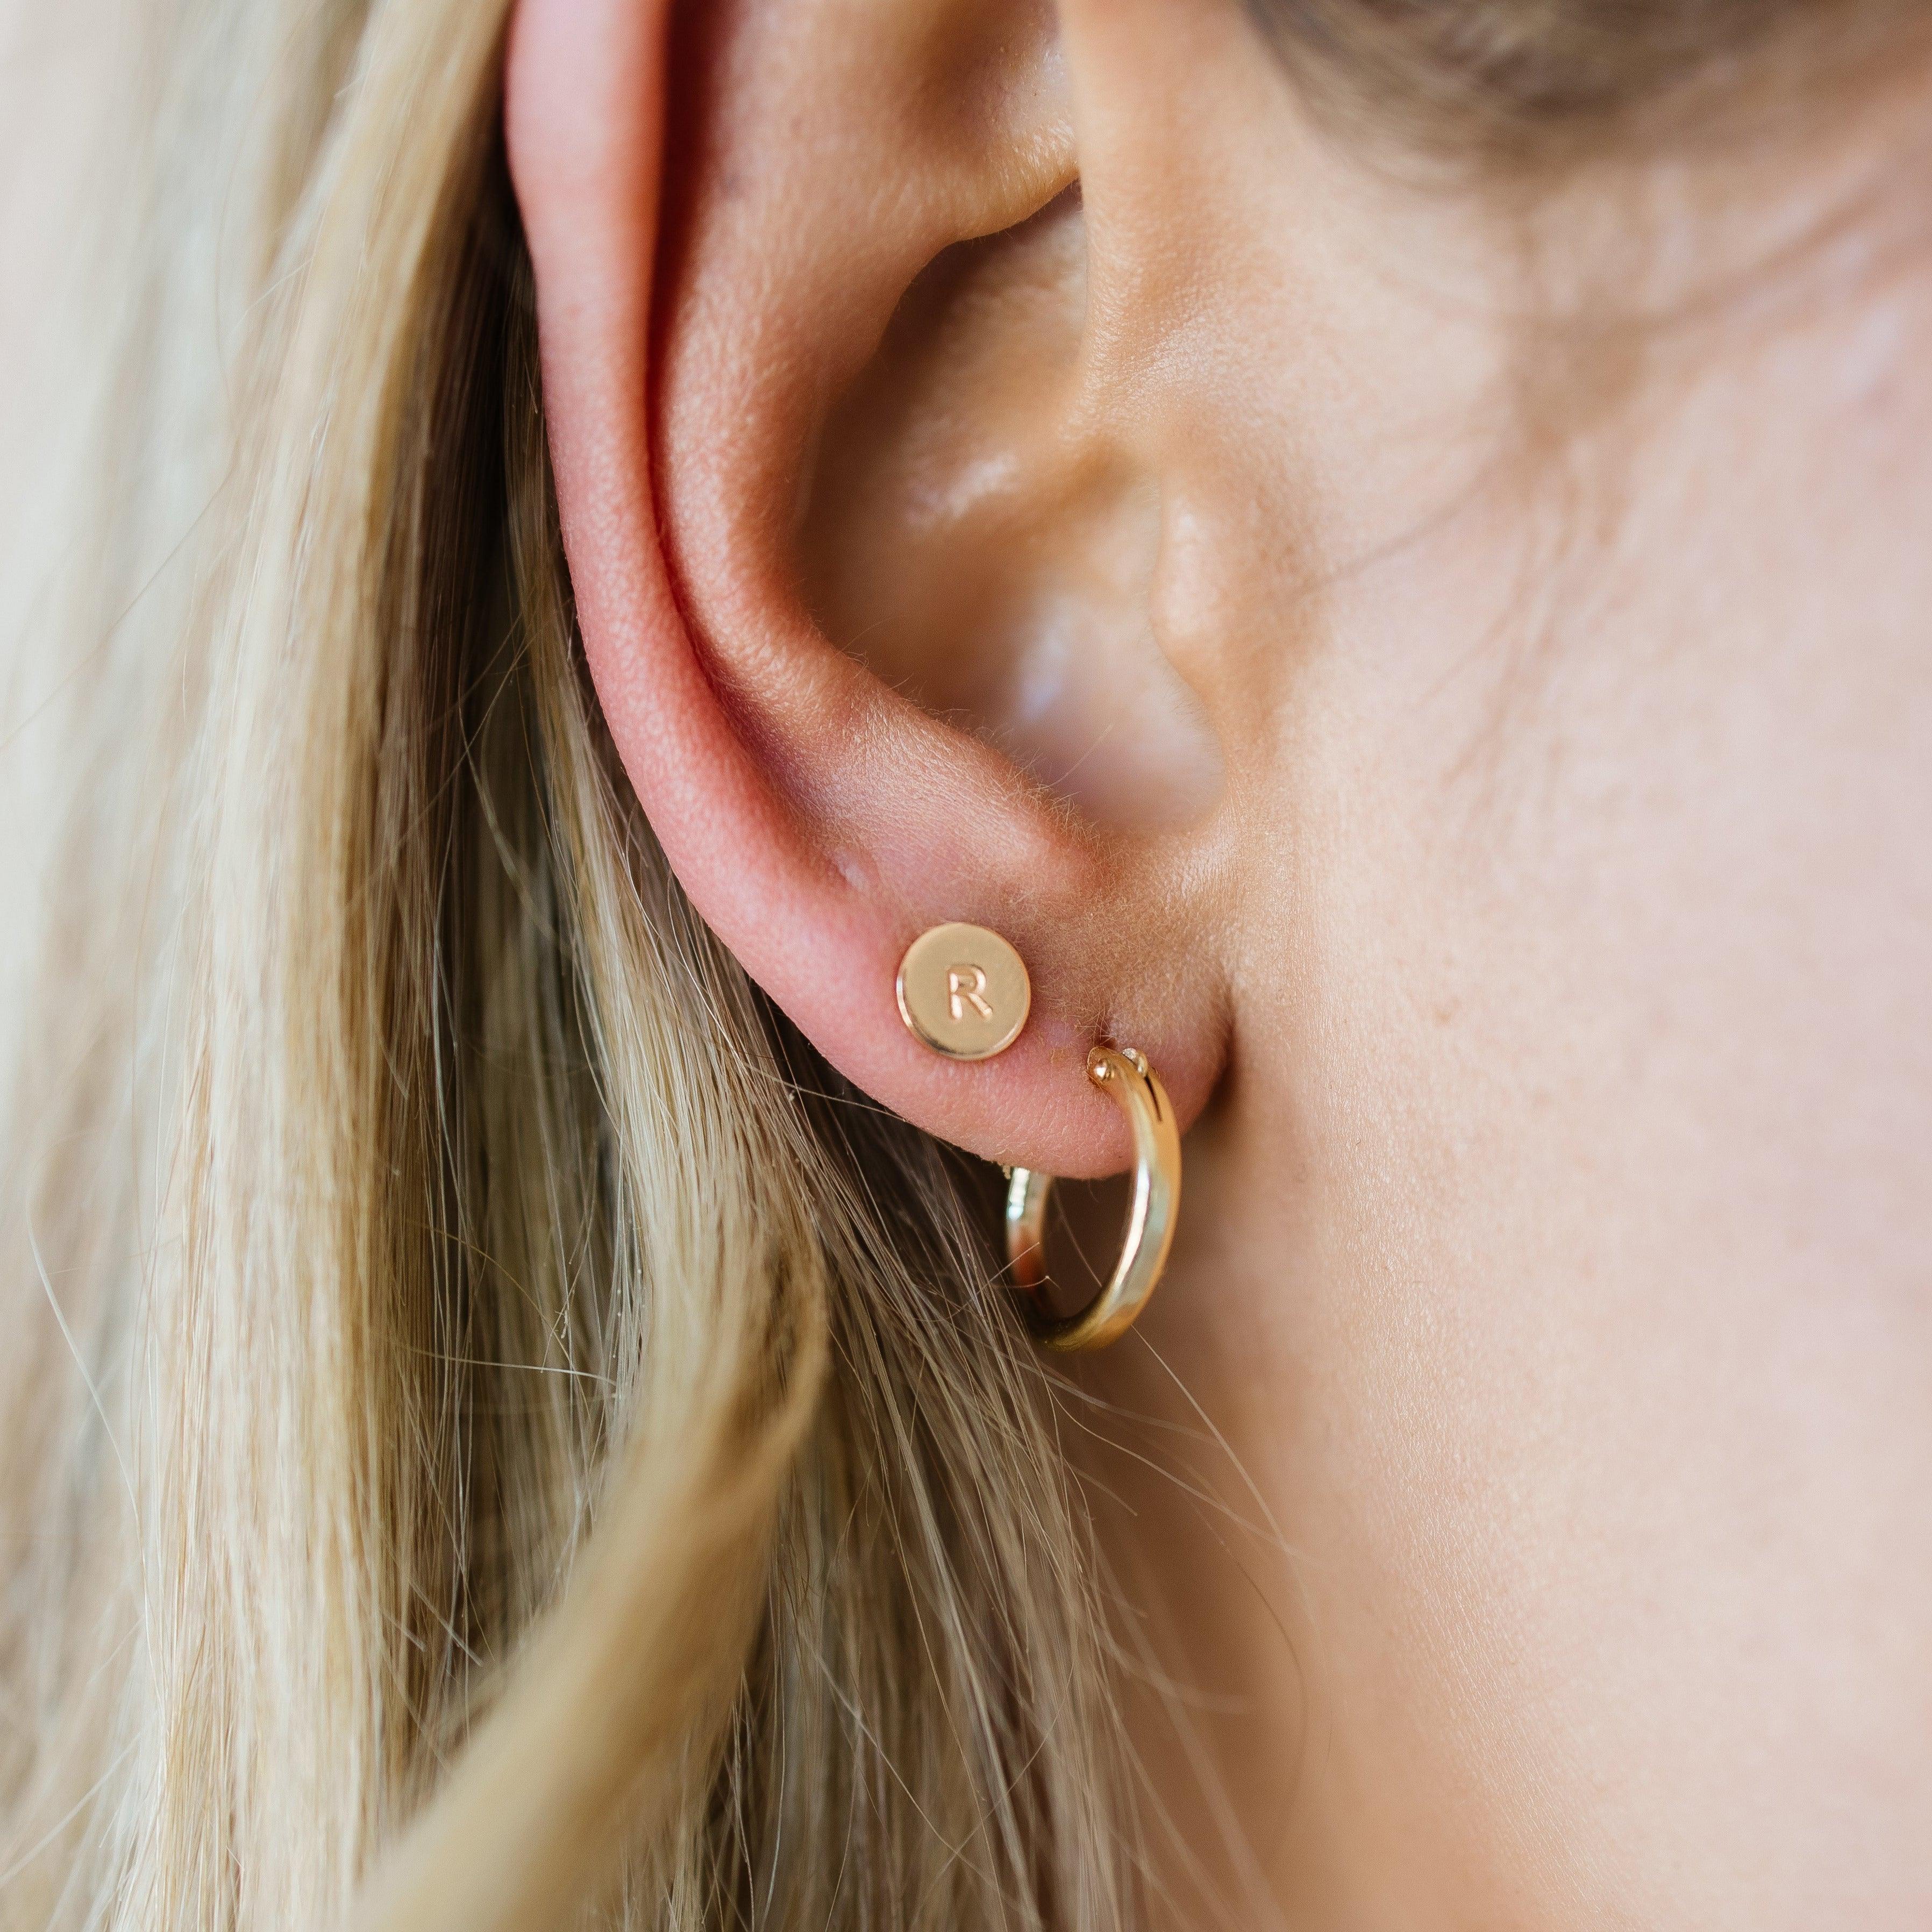 Ellie Personalized Stud Earrings - Nolia Jewelry - Meaningful + Sustainably Handcrafted Jewelry